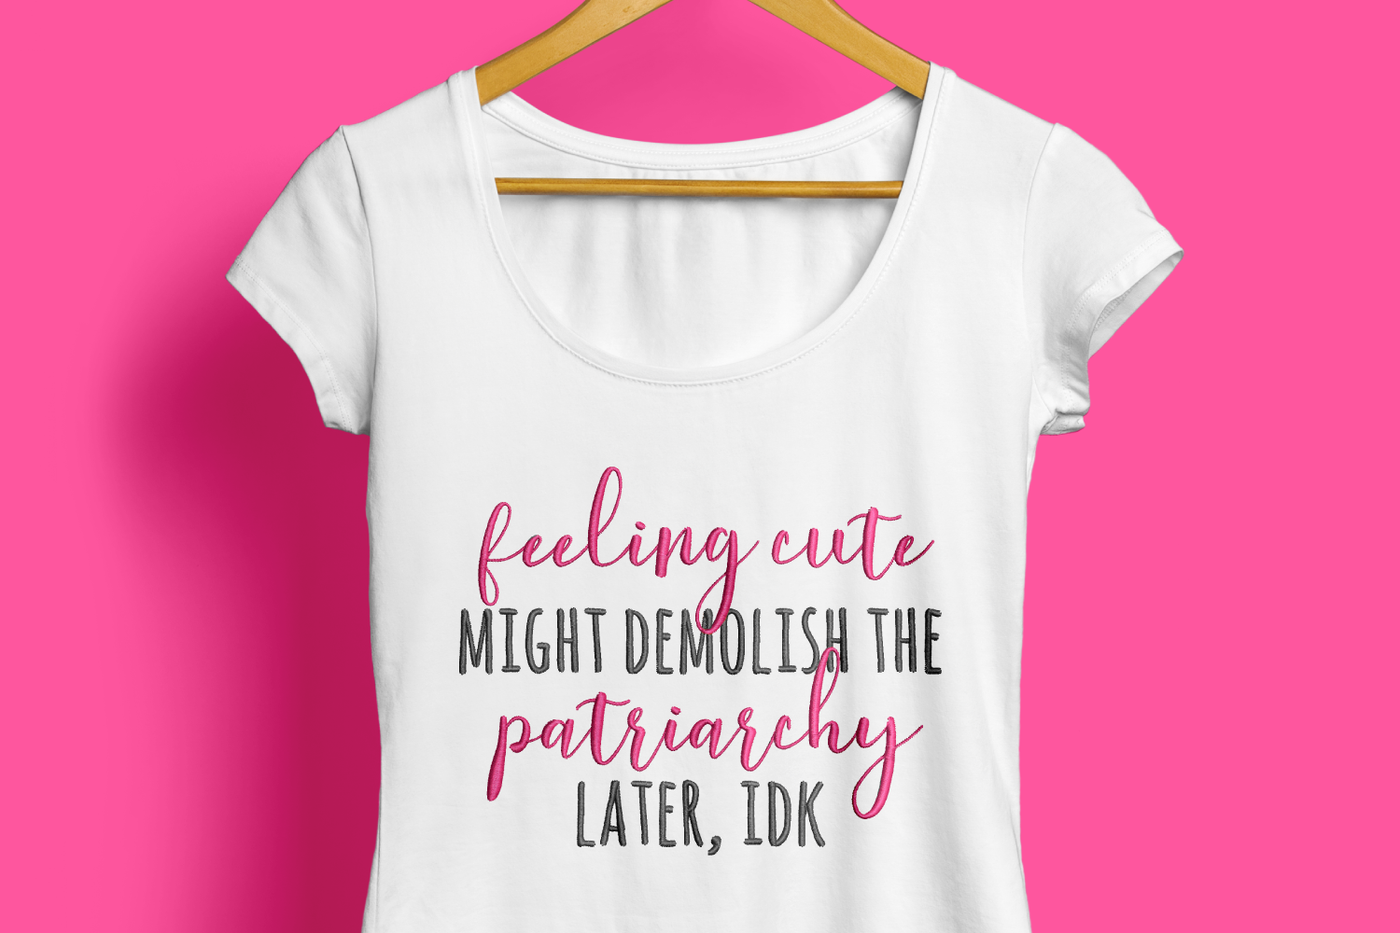 A white shirt with the embroidered phrase "feelign cute might demolish the patriarchy later, IDK"